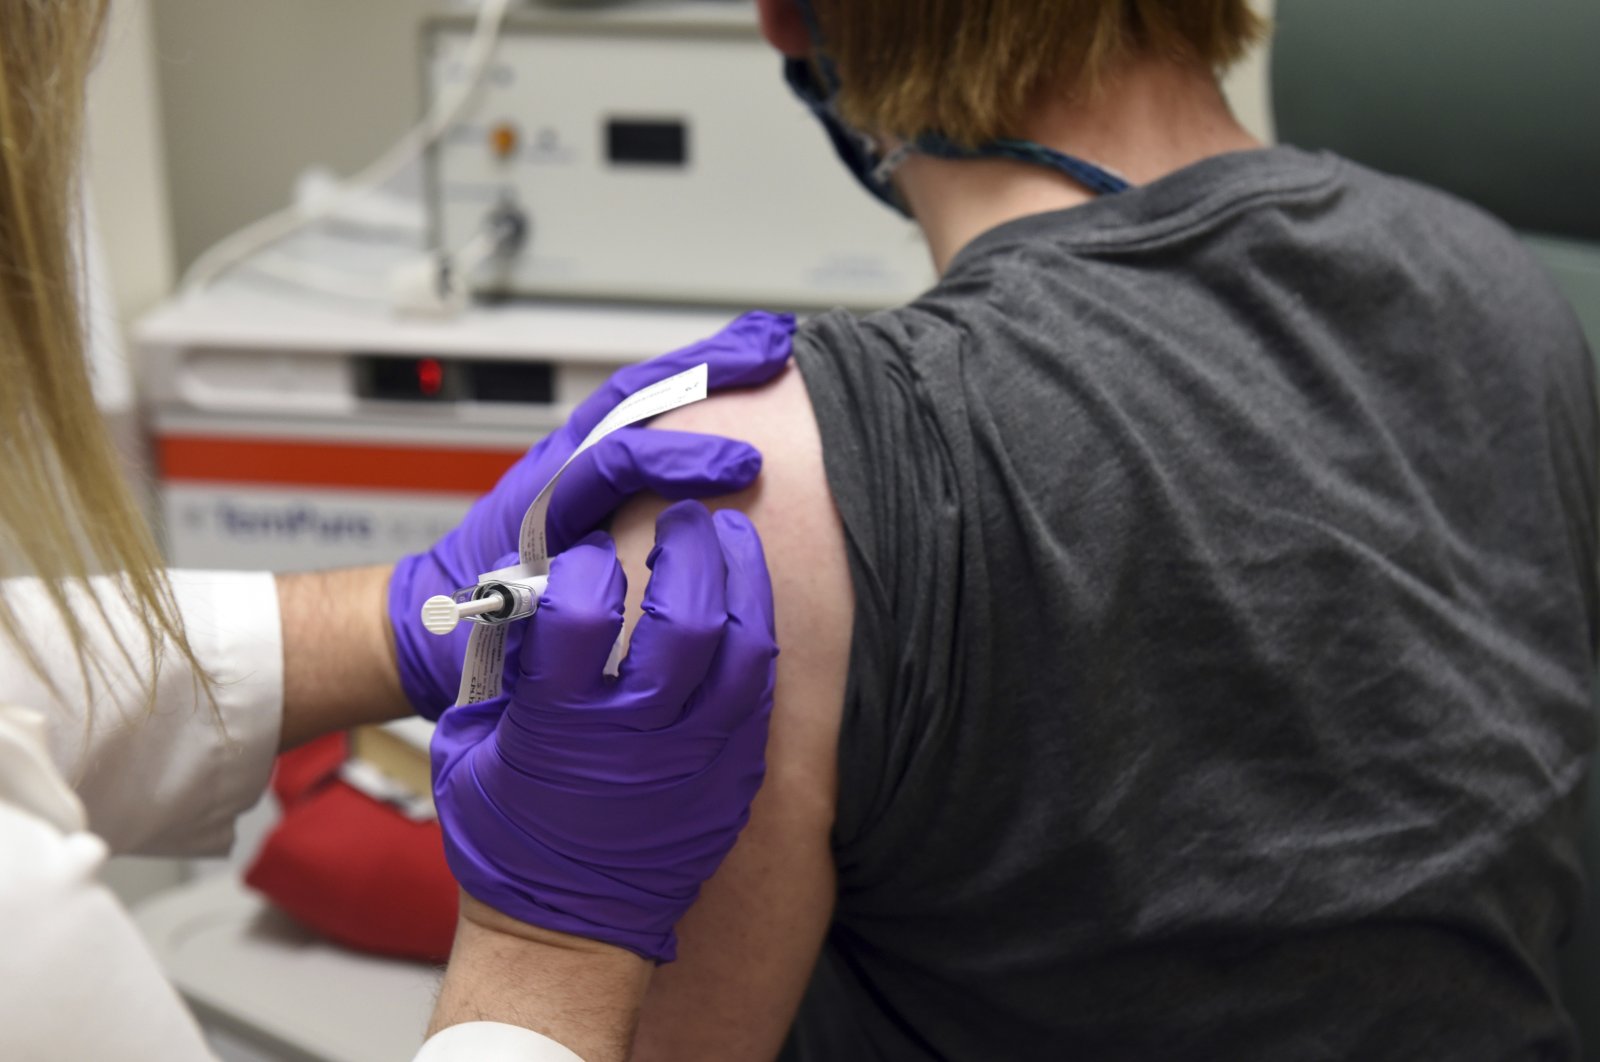 This May 4, 2020, file photo provided by the University of Maryland School of Medicine, shows the first patient enrolled in Pfizer's COVID-19 coronavirus vaccine clinical trial at the University of Maryland School of Medicine in Baltimore. (AP Photo)